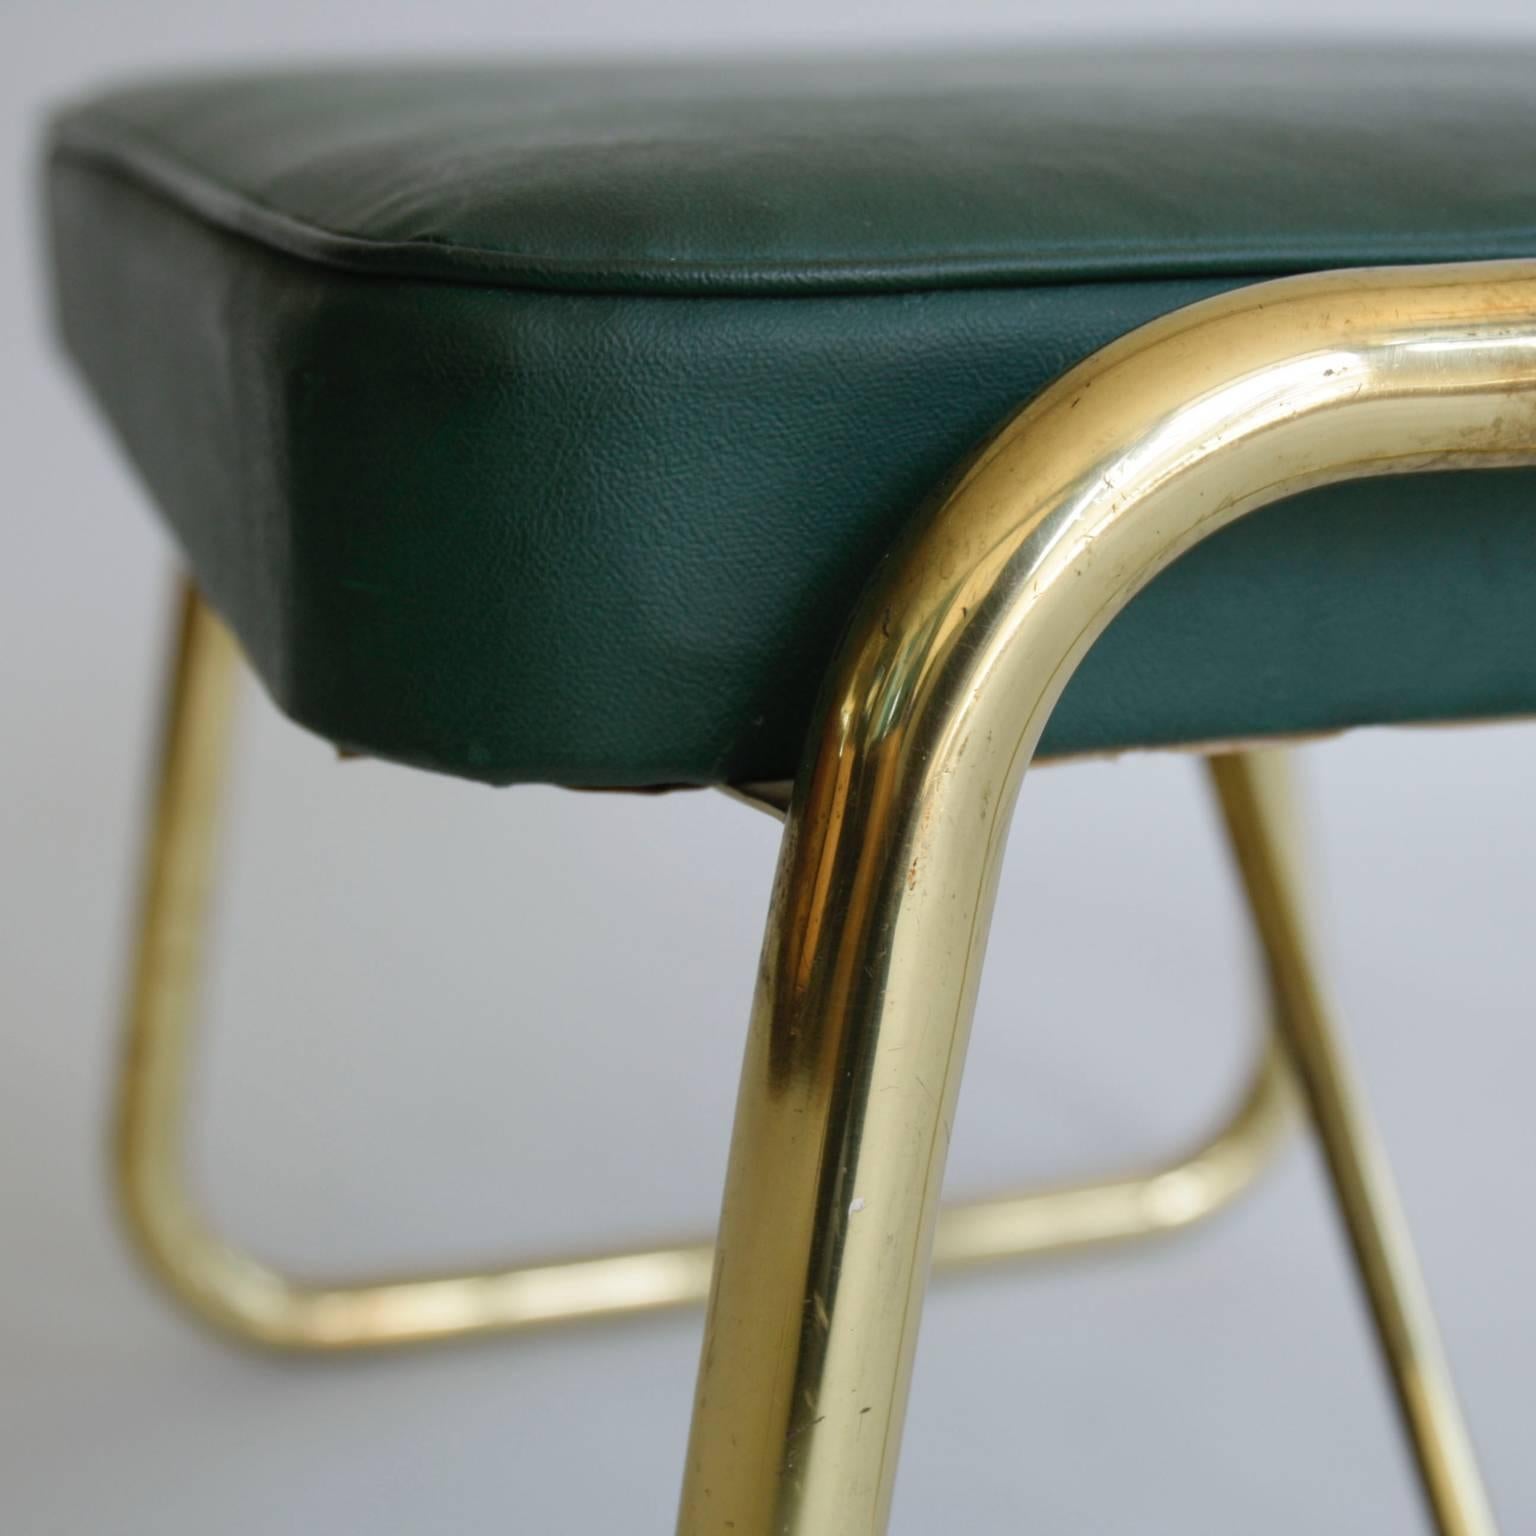 Pair of 1950s Italian Footstools or Ottomans, Brass and Green (Messing)